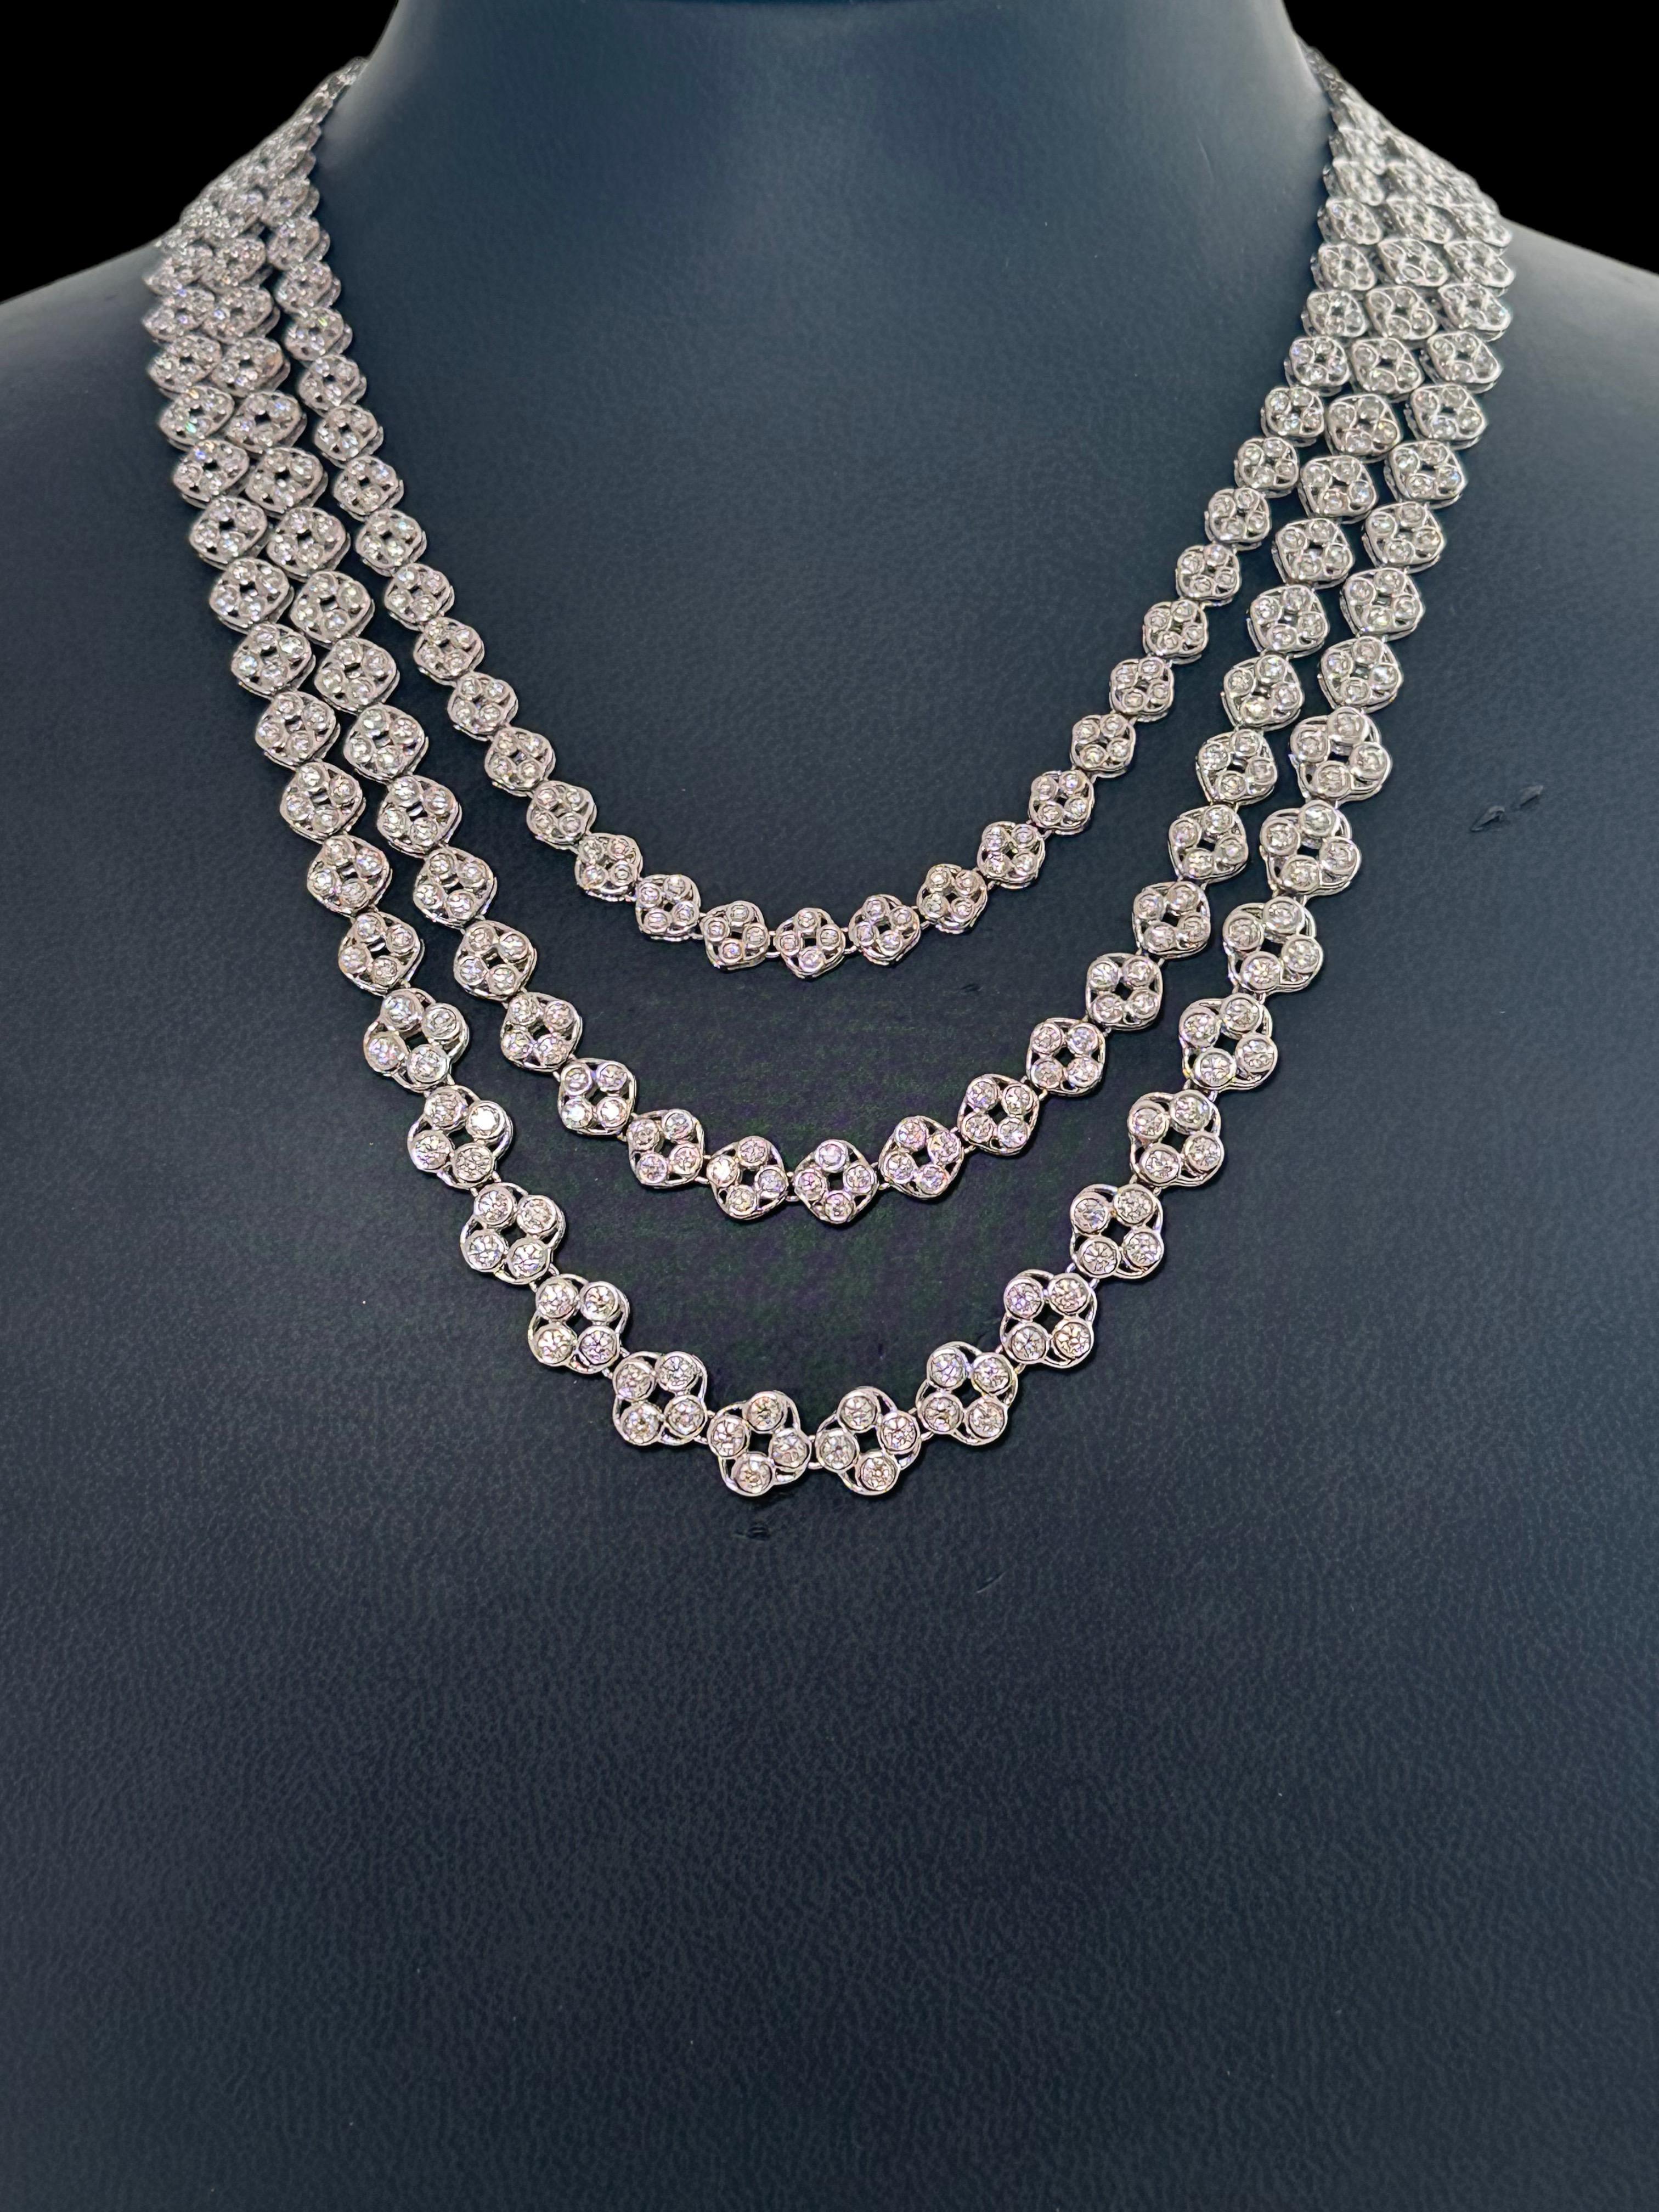 Women's or Men's 18 kt. White Gold Multi Strand Necklace with 23.48 ct. Brilliant cut Diamonds  For Sale